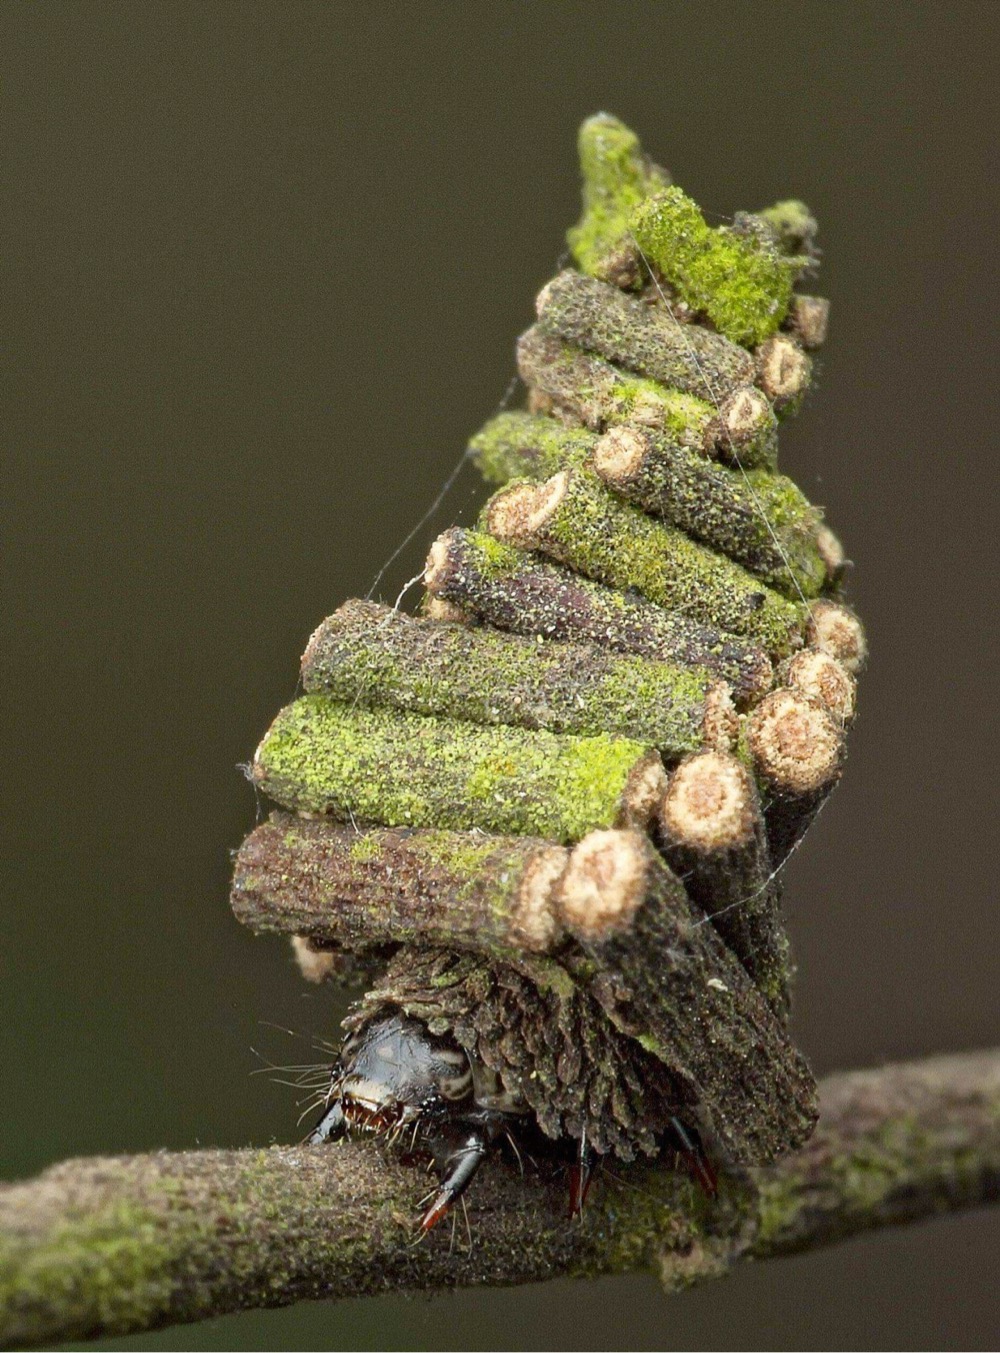 a little house a bagworm caterpillar has built on its back out of twigs